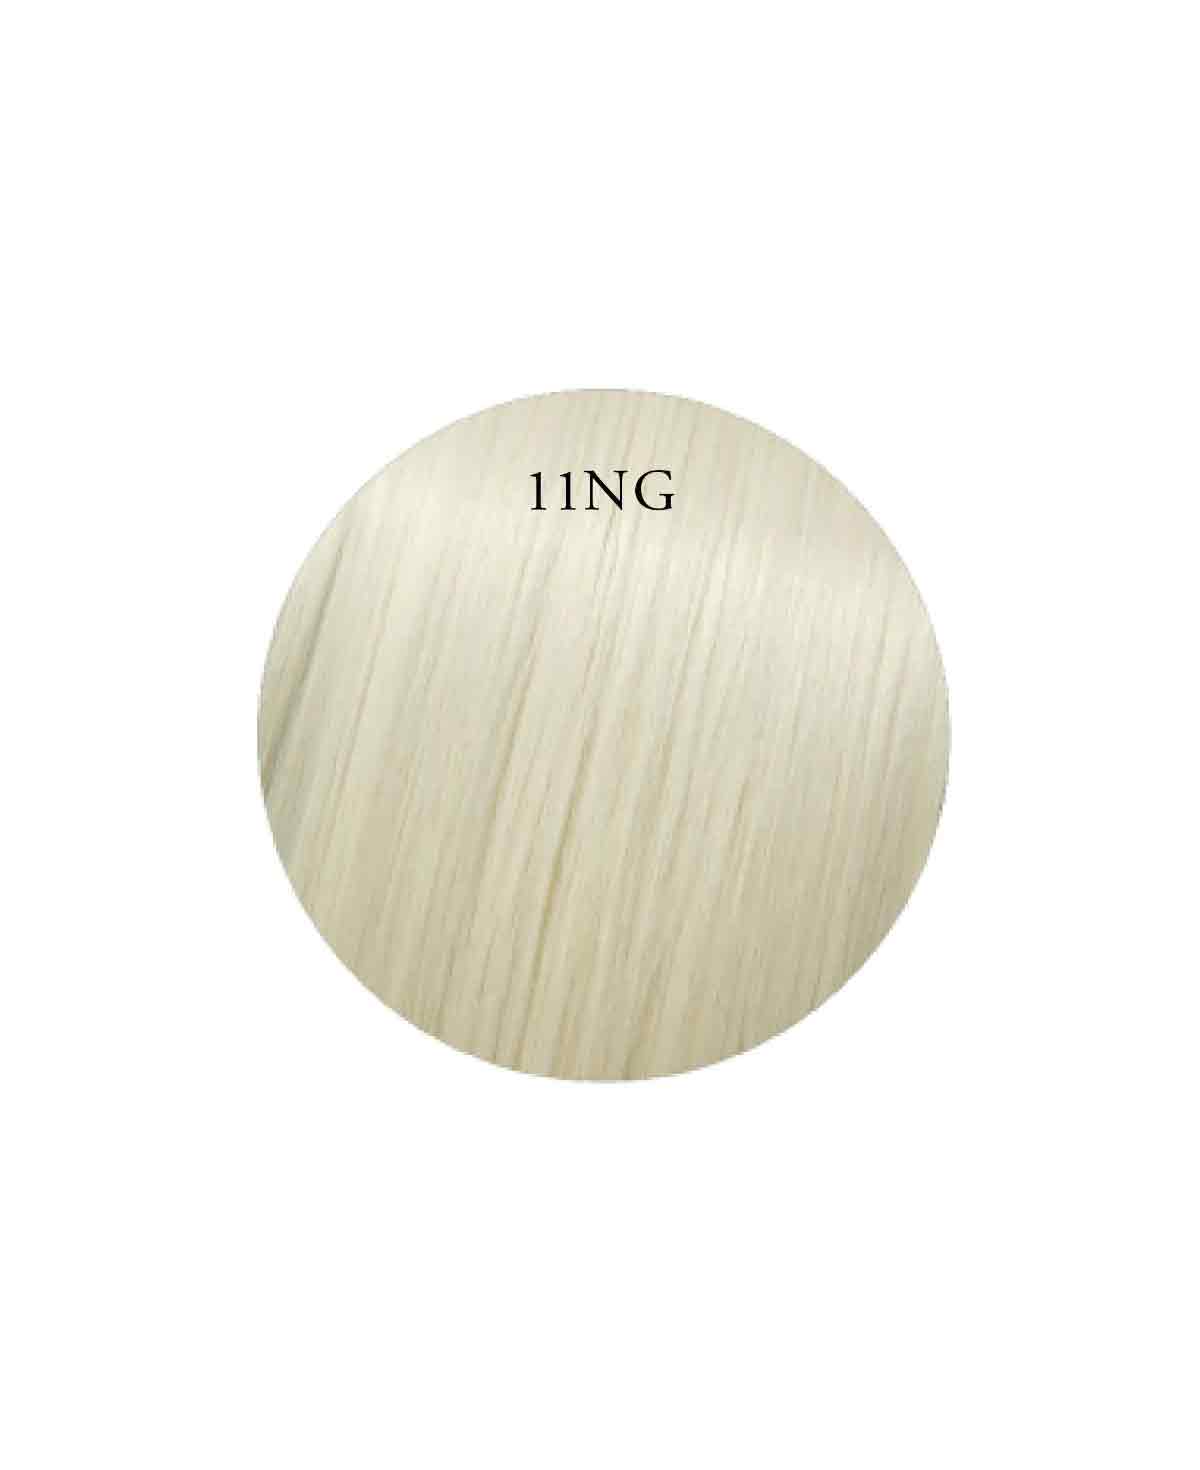 Showpony 45-50cm (20") Skin Weft Extensions - 11NG Silver Blonde